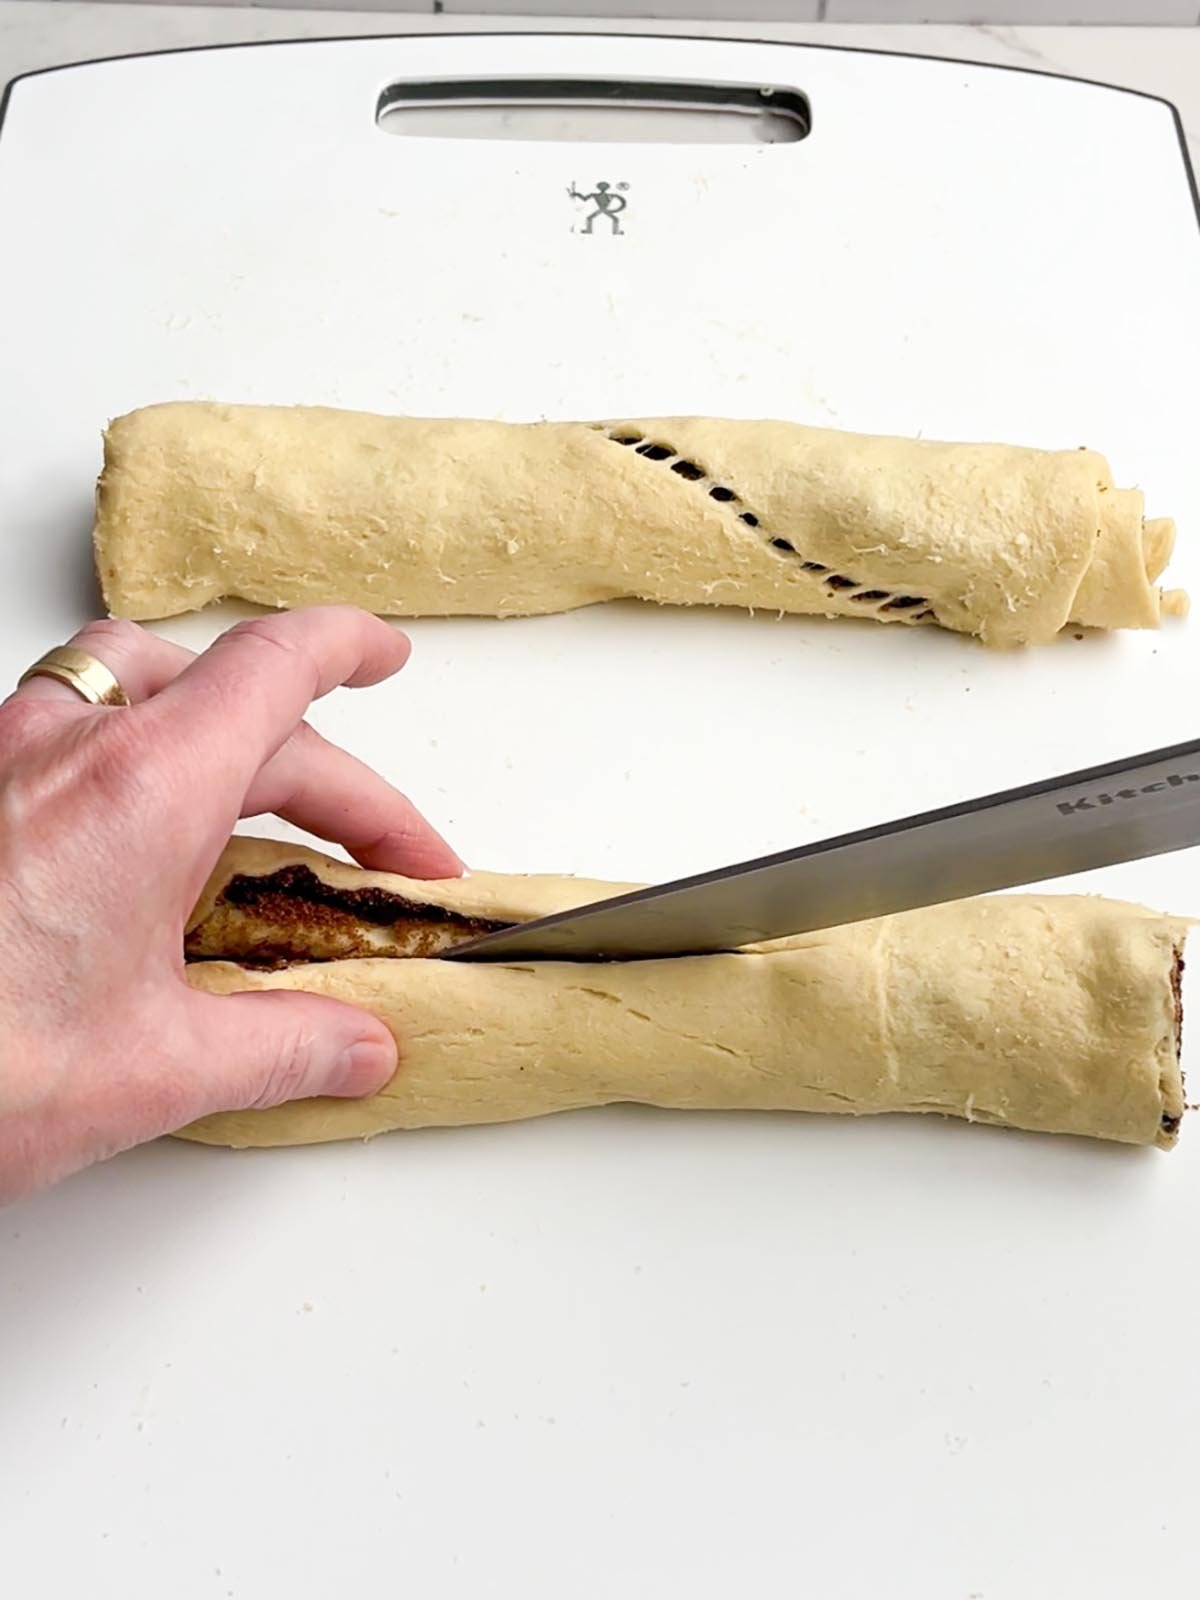 hand holding a knife cutting the dough in half